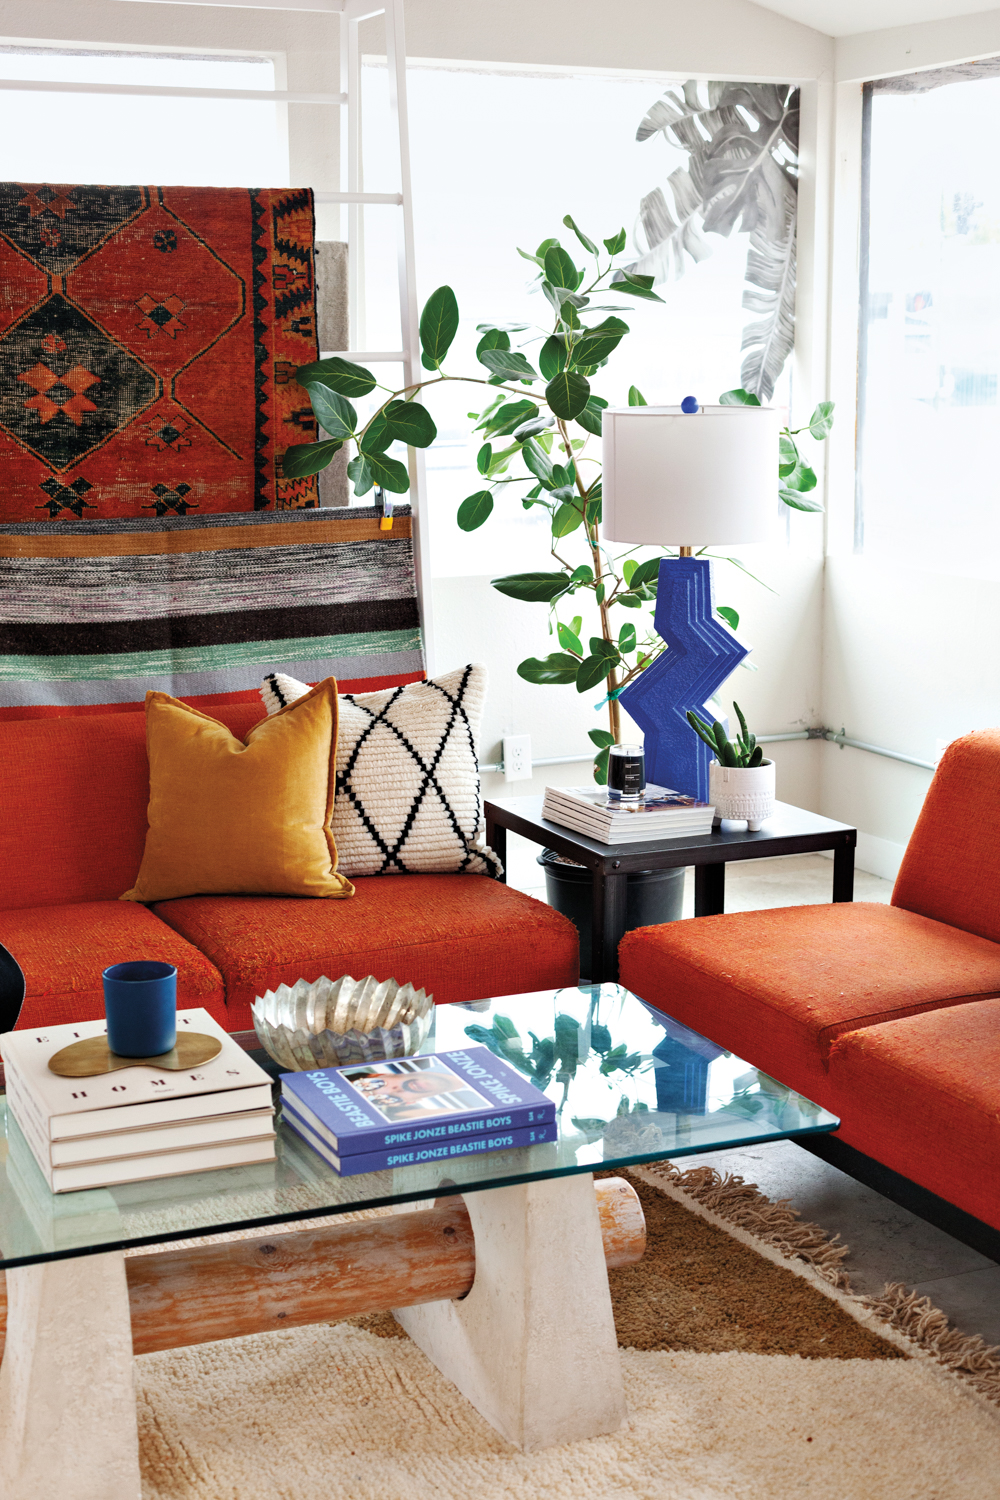 Seating vignette in store with orange sofas, hanging rugs and blue lamp.